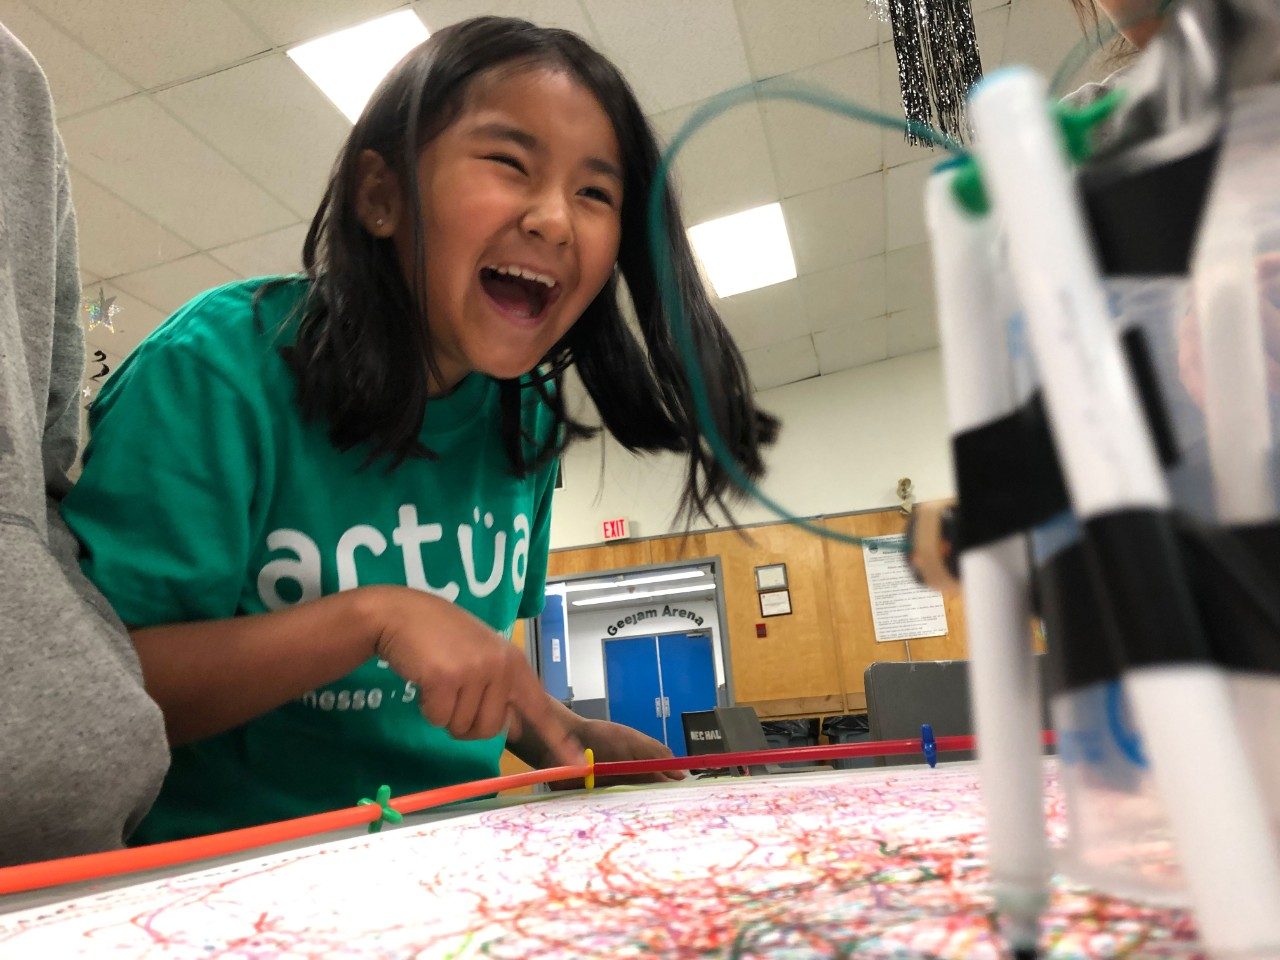 Smiling young girl participating in STEM event, hosted by Actua